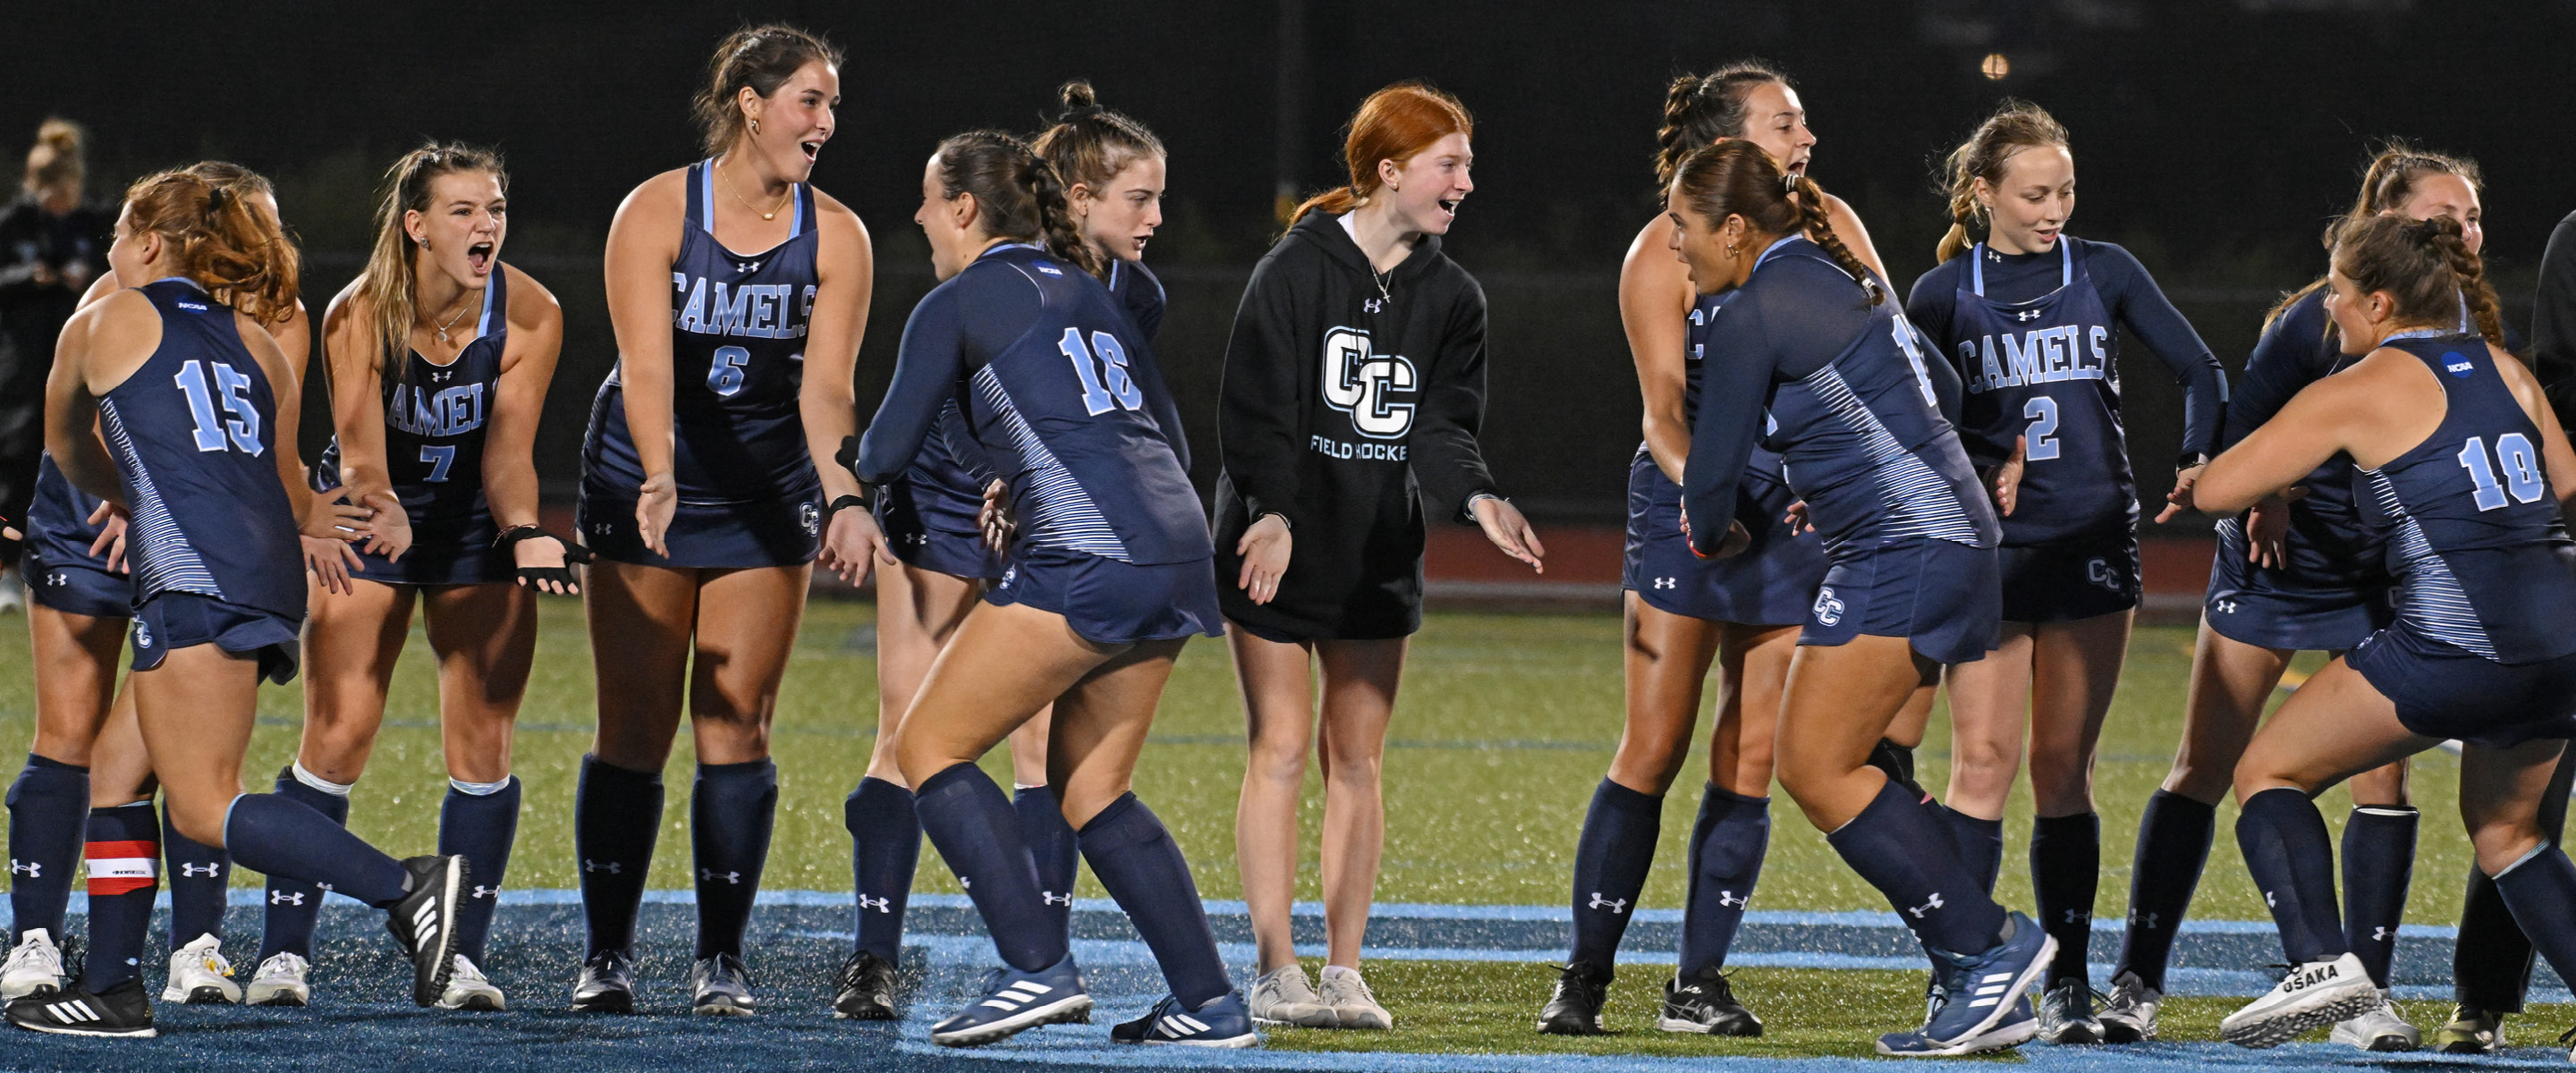 Field hockey team line up welcomes players to the field